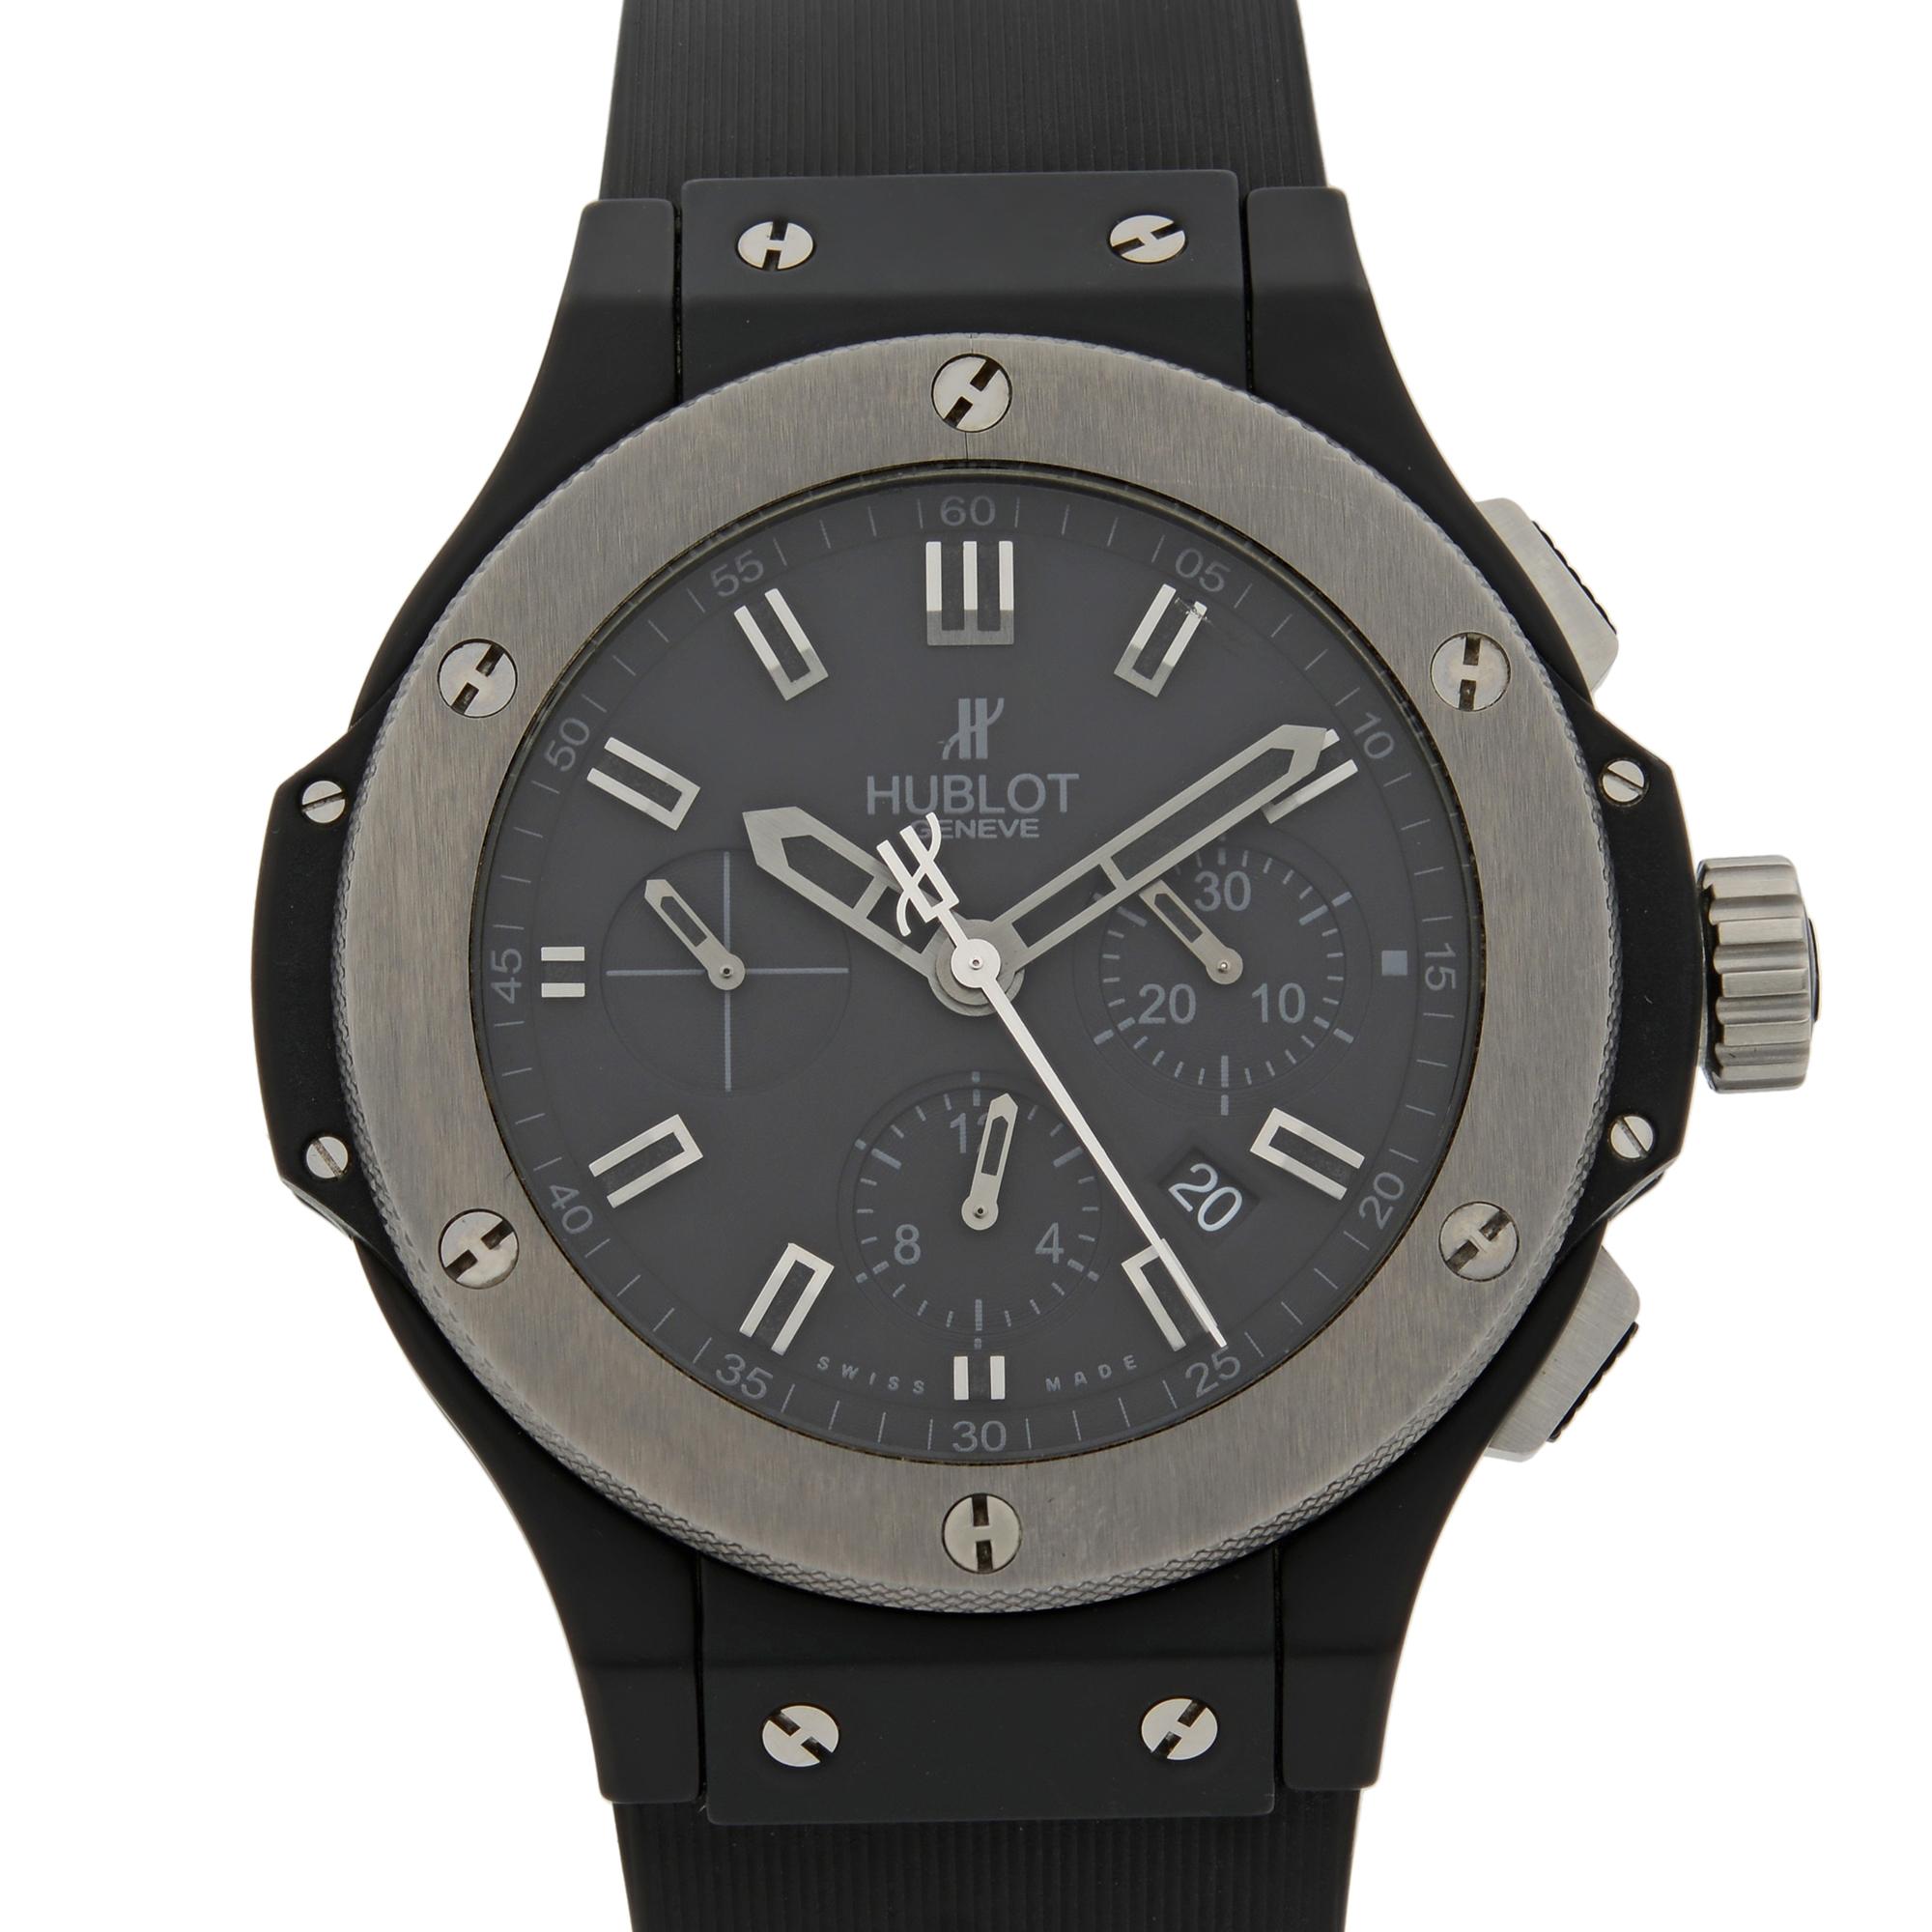 This pre-owned Hublot Big Bang 301.CK.1140.RX is a beautiful men's timepiece that is powered by mechanical (automatic) movement which is cased in a ceramic case. It has a round shape face, chronograph, date indicator, small seconds subdial dial and